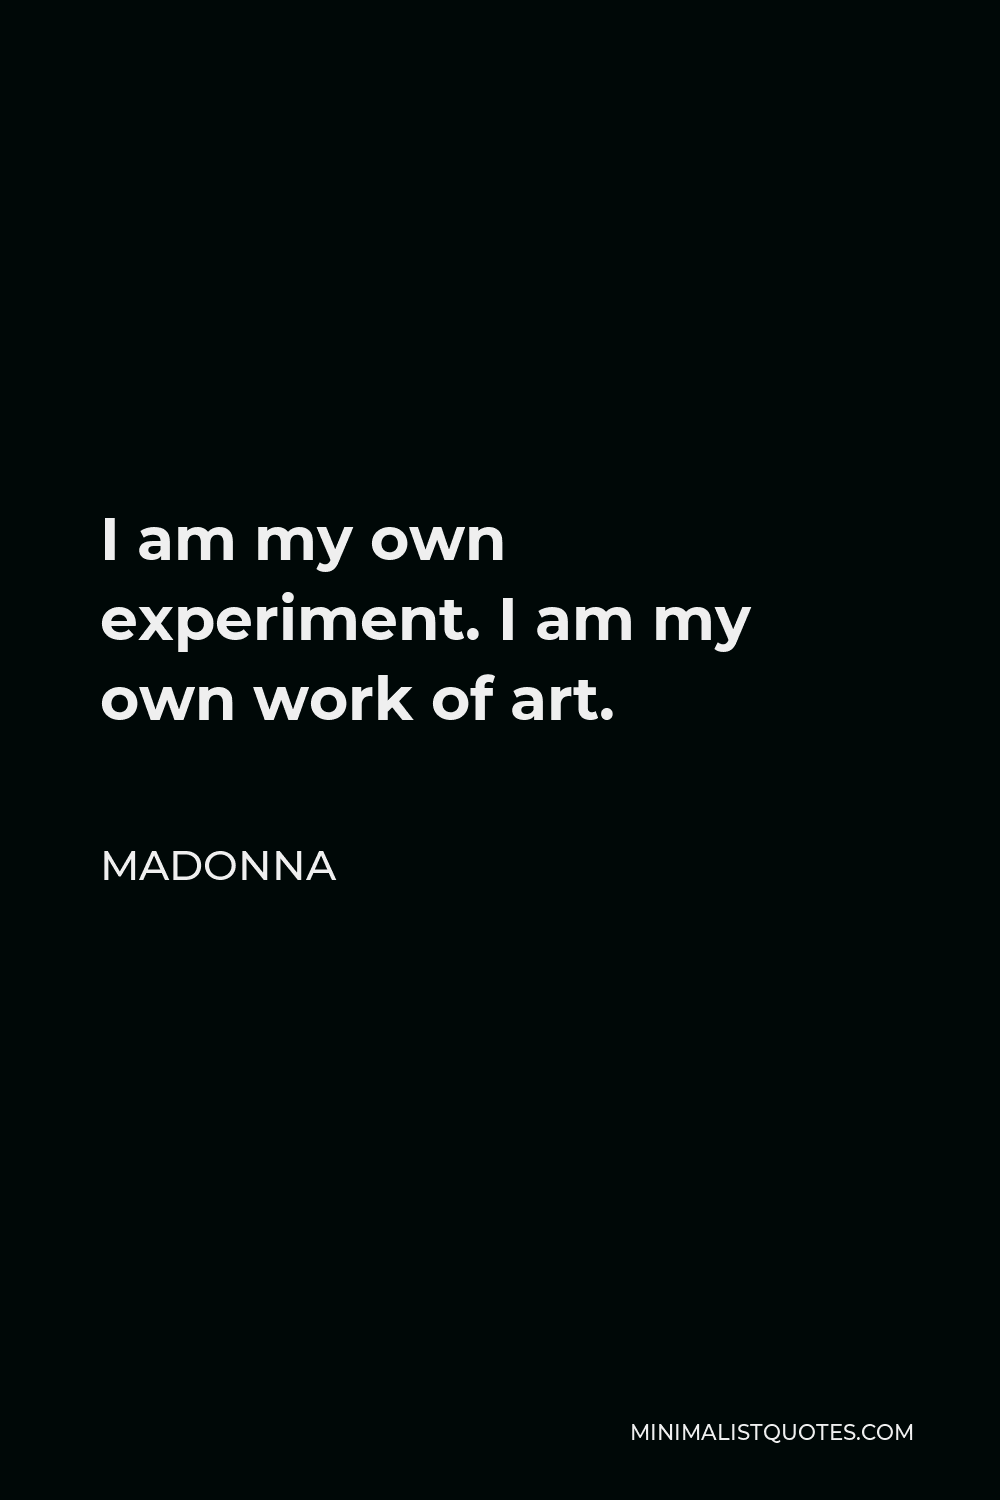 Madonna Quote: I am my own experiment. I am my own work of art.